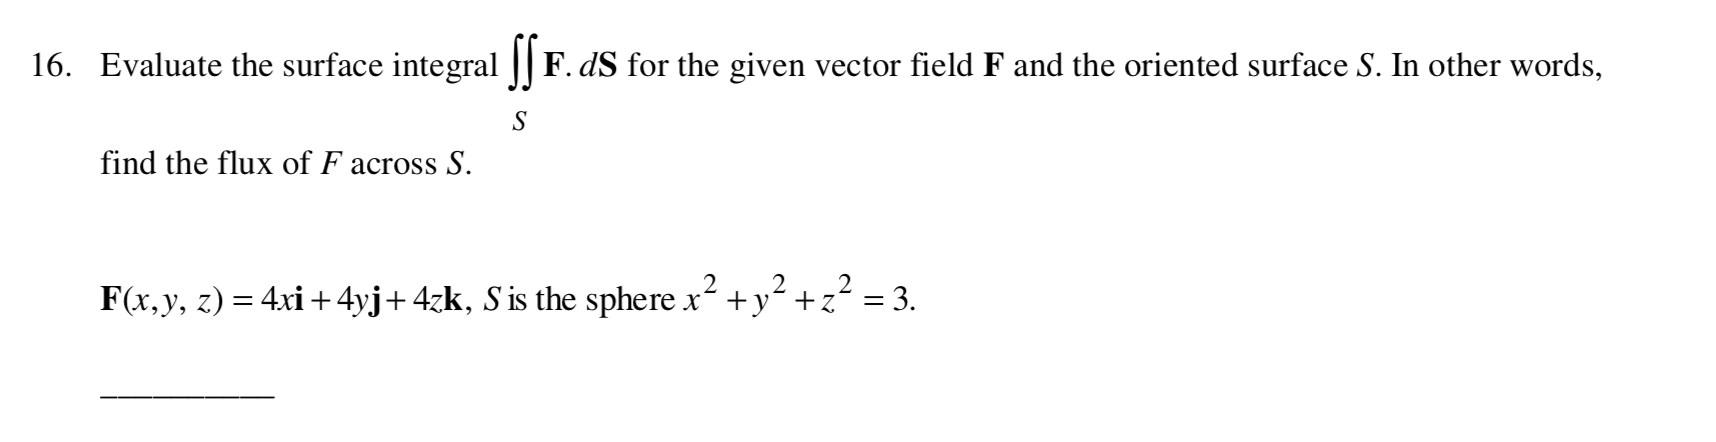 Evaluate the surface integral || F. dS for the given vector field F and the oriented surface S. In other words,
S
find the flux of F across S.
2
F(x,y, z) = 4xi + 4yj+4zk, S is the sphere x +y² +z² = 3.
